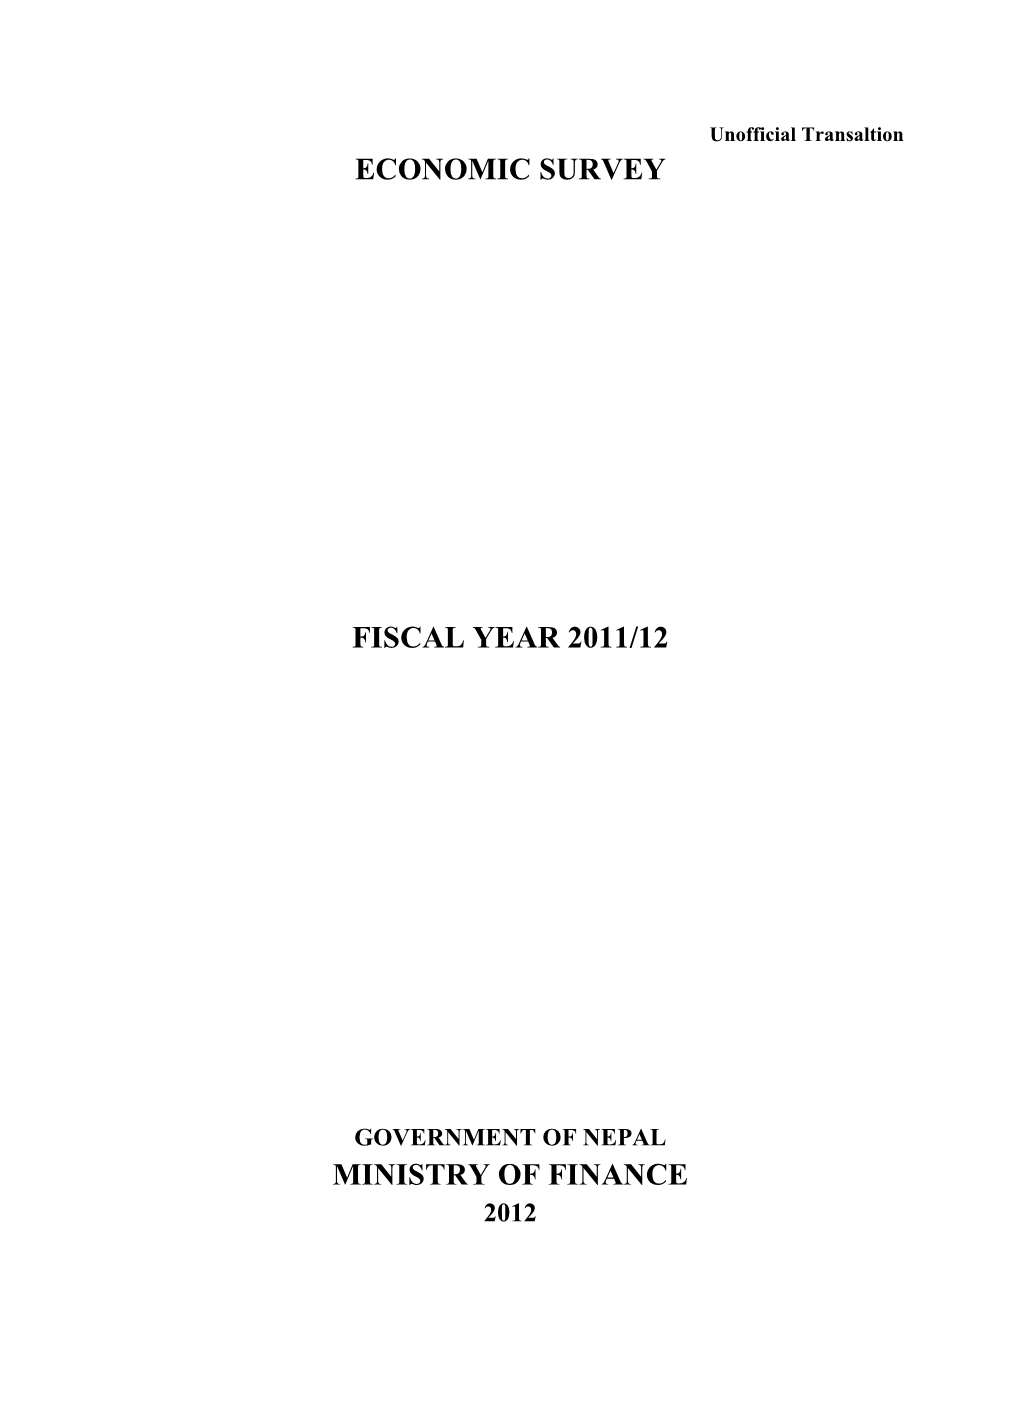 Economic Survey Fiscal Year 2011/12 Ministry of Finance